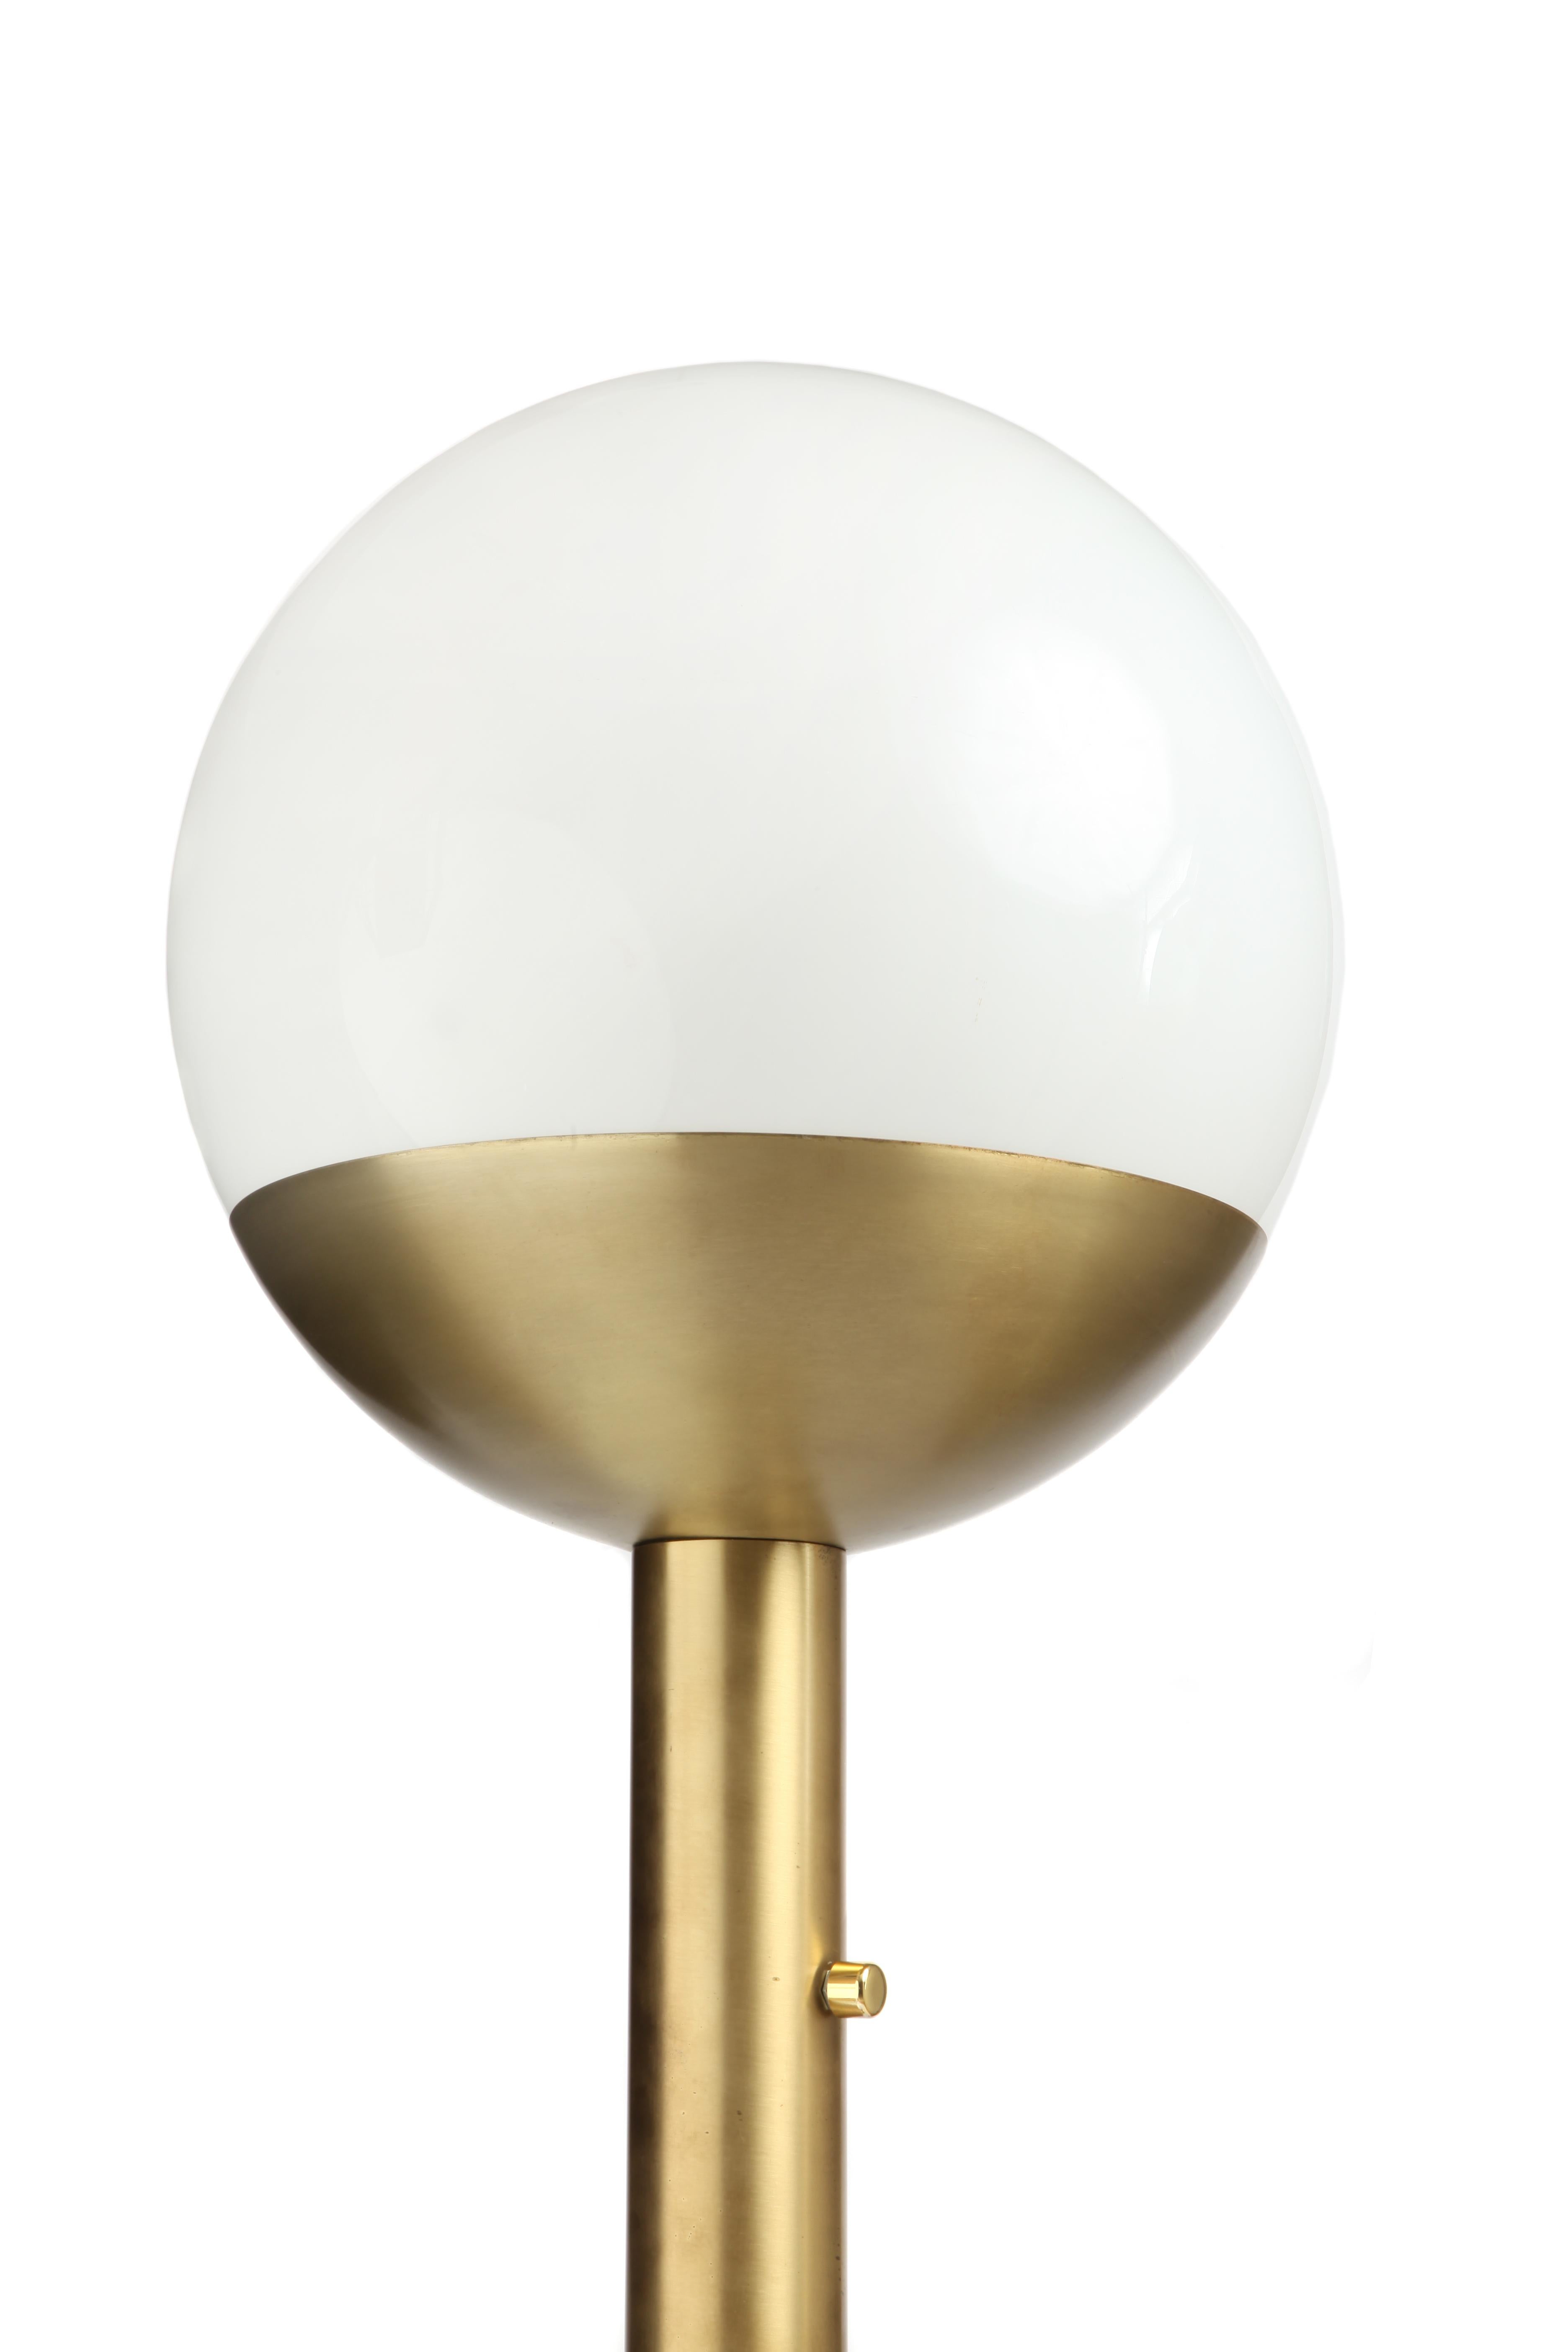 Vintage Italian floor lamp from the 1970s. Brass base and stand with opal glass orb.

P428 lamp in brass and opalin glass by Pia Guidetti Crippa for Luci from the 60s. Structure in golden brass with bronze patina and lamp shade in white opaline